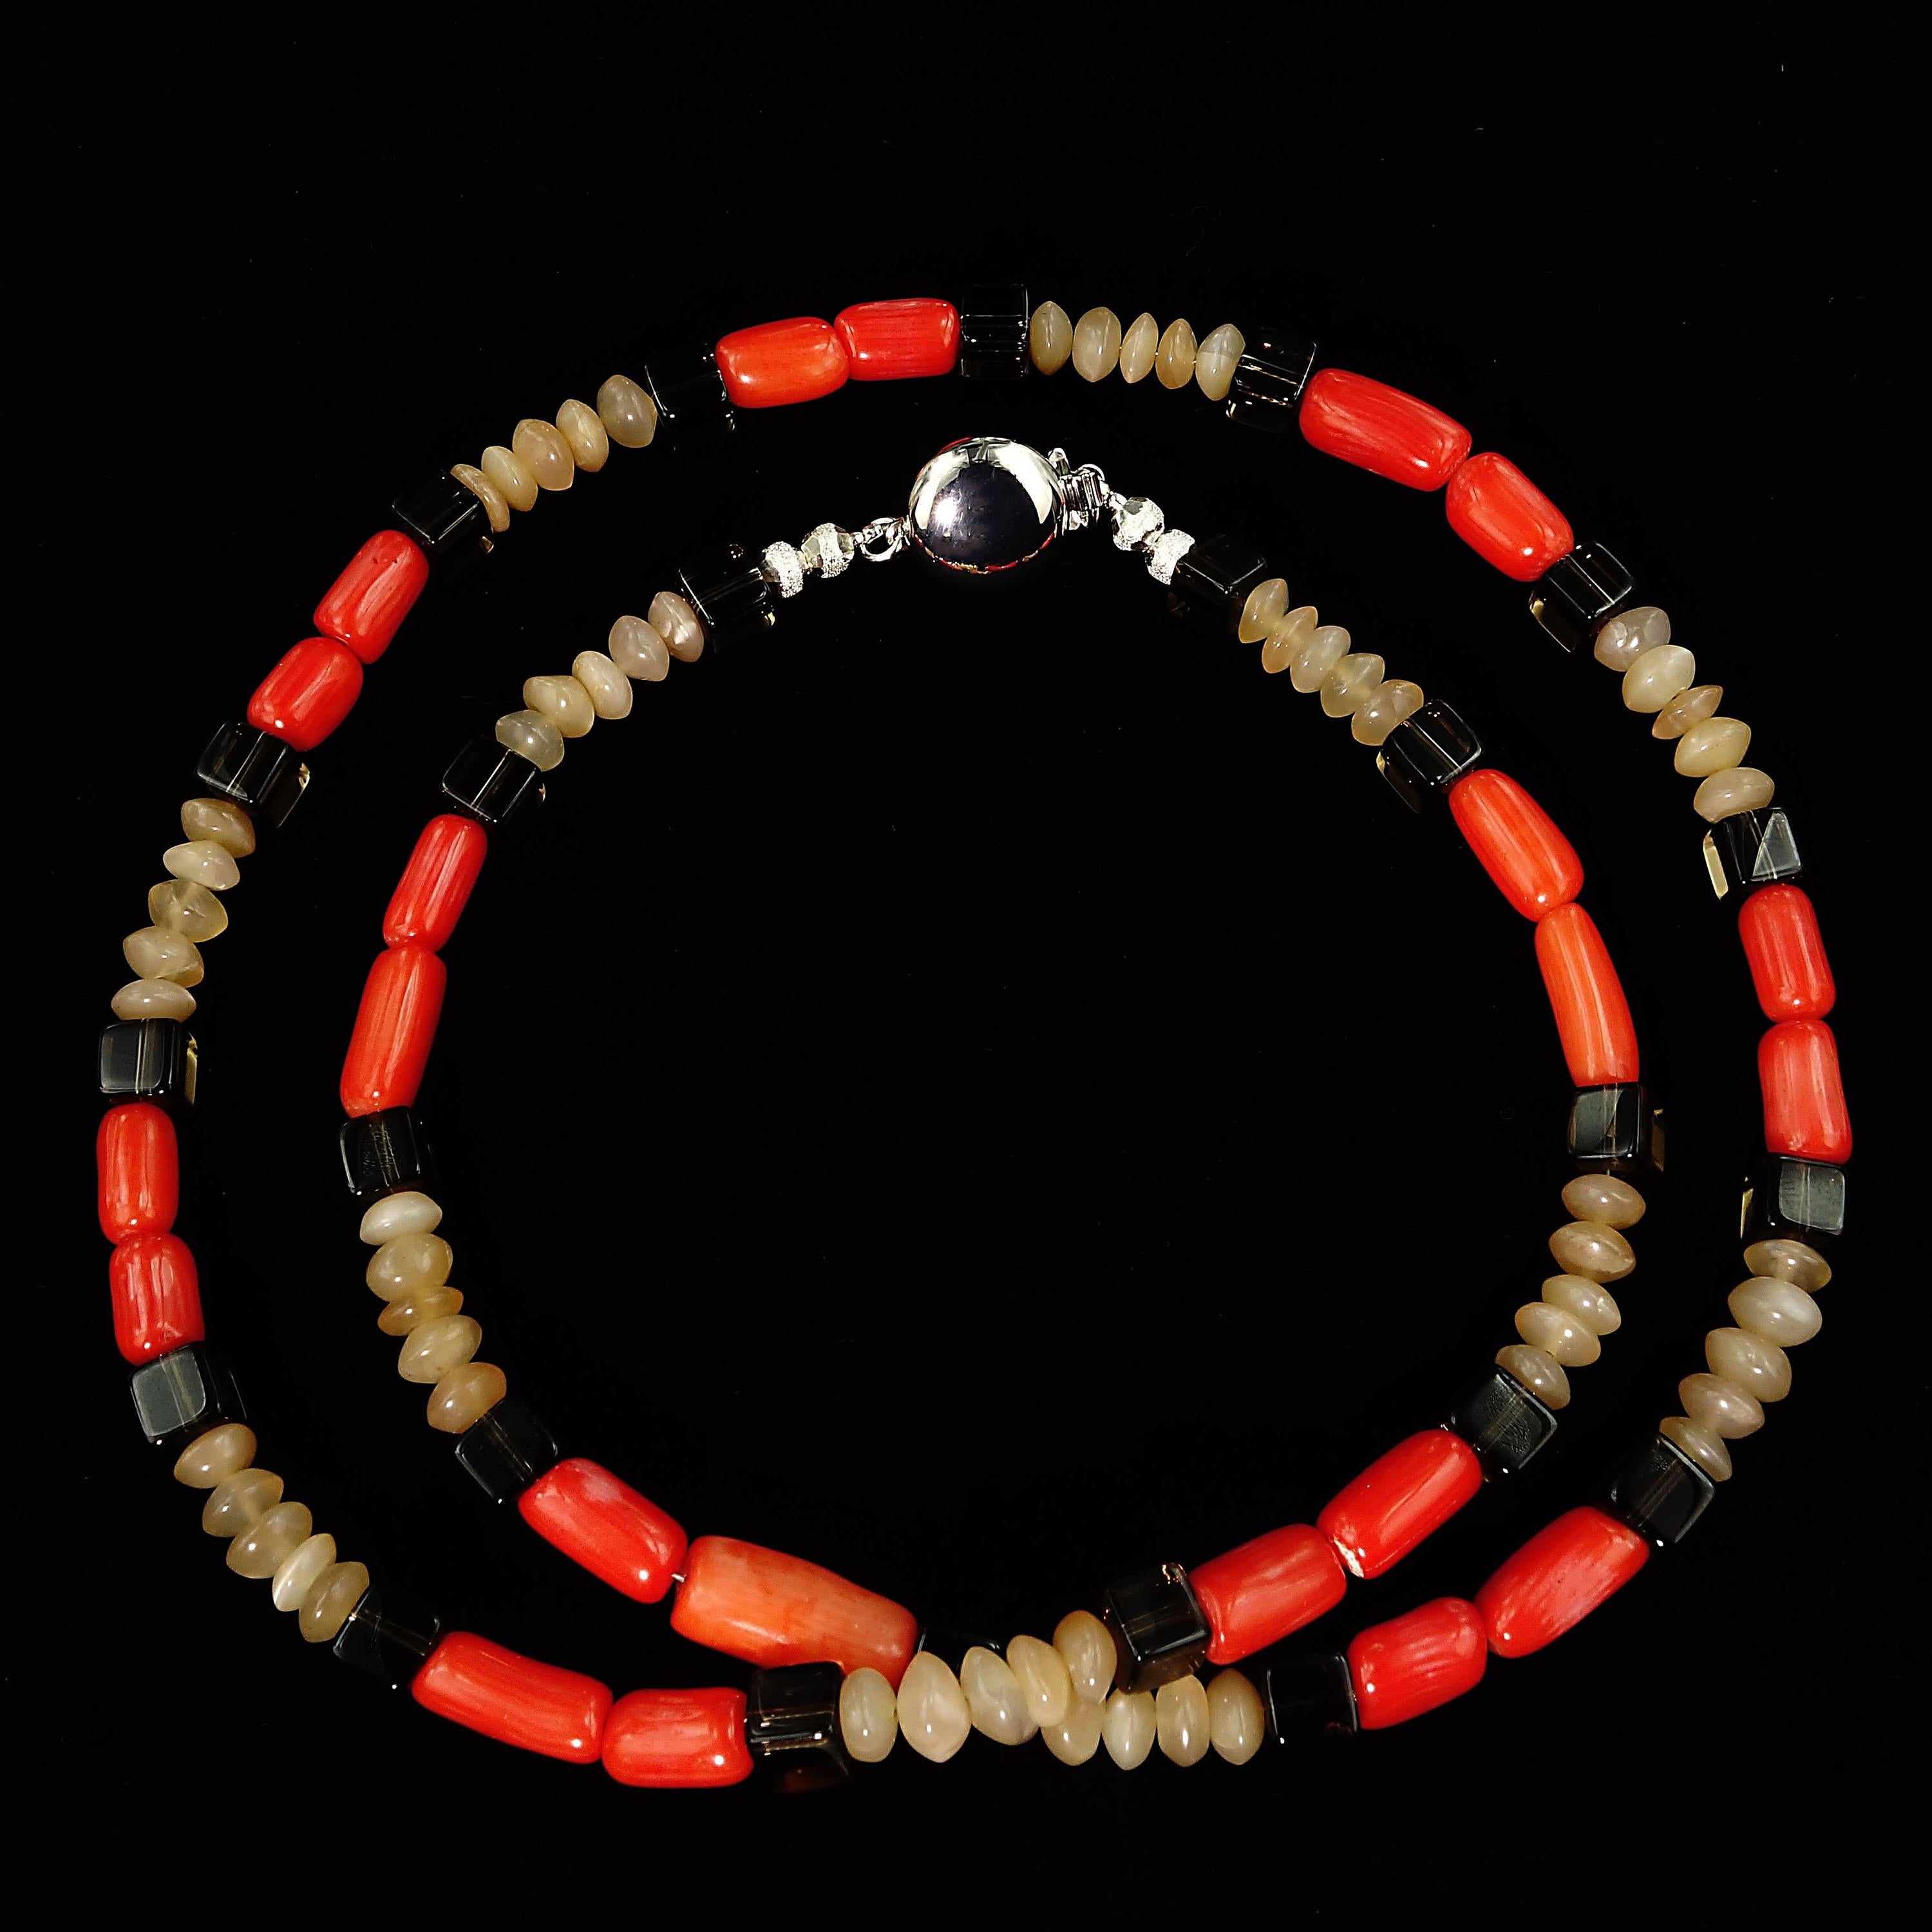 Delightful, handmade necklace of highly polished bright orange Coral tubes, rondelles of Sunstone, and squares of transparent Smoky Quartz. Smoky Quartz is a variant of the Quartz mineral family which ranges in color from a light gray to darker